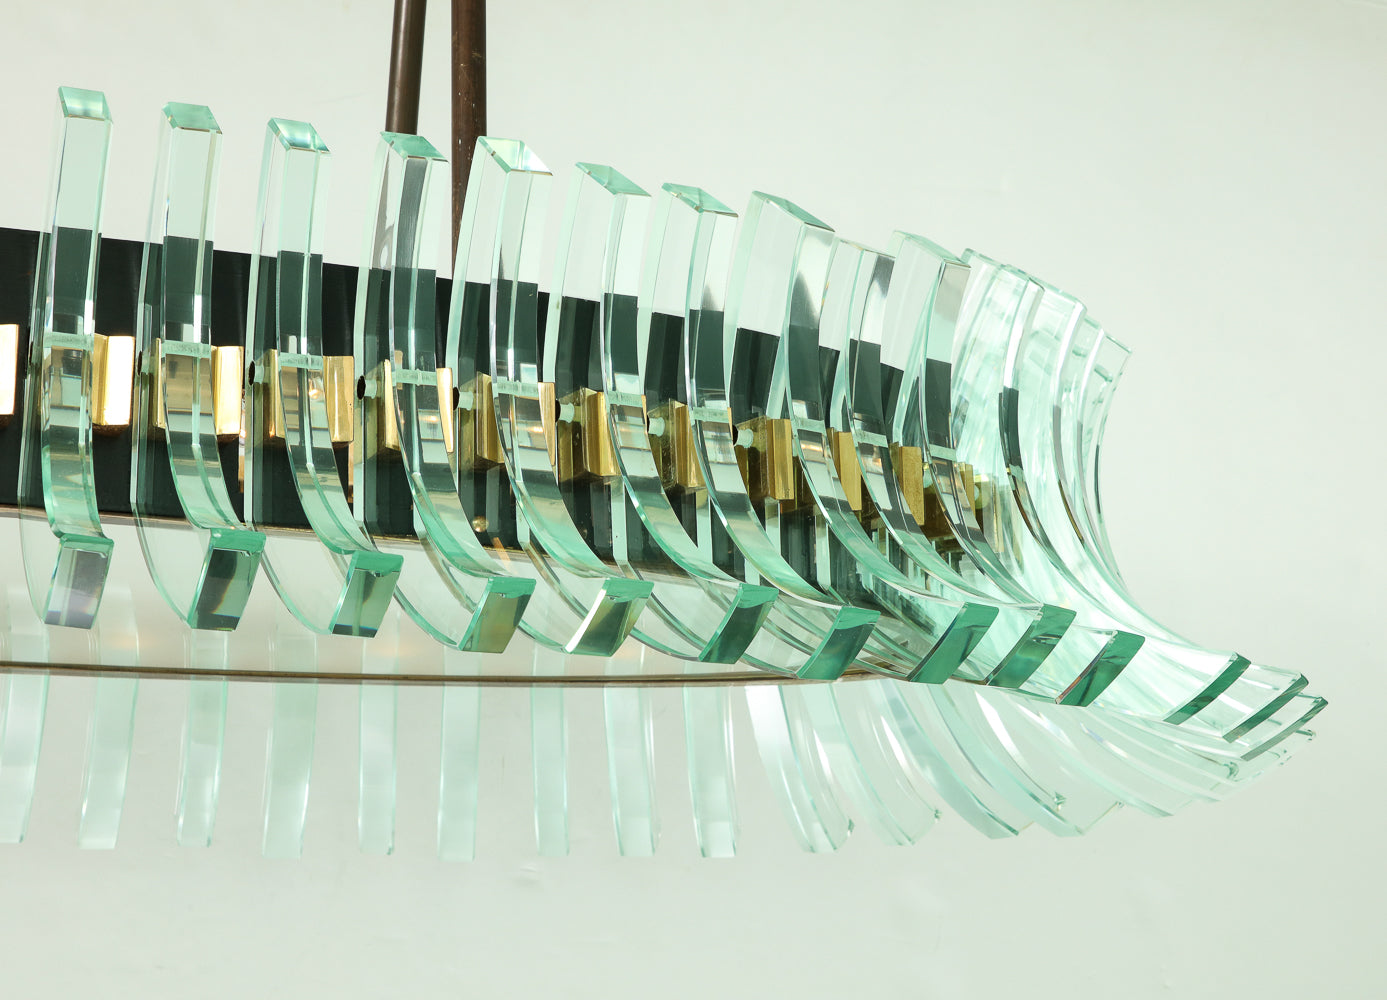 Model No. 1880 Chandelier by Max Ingrand for Fontana Arte